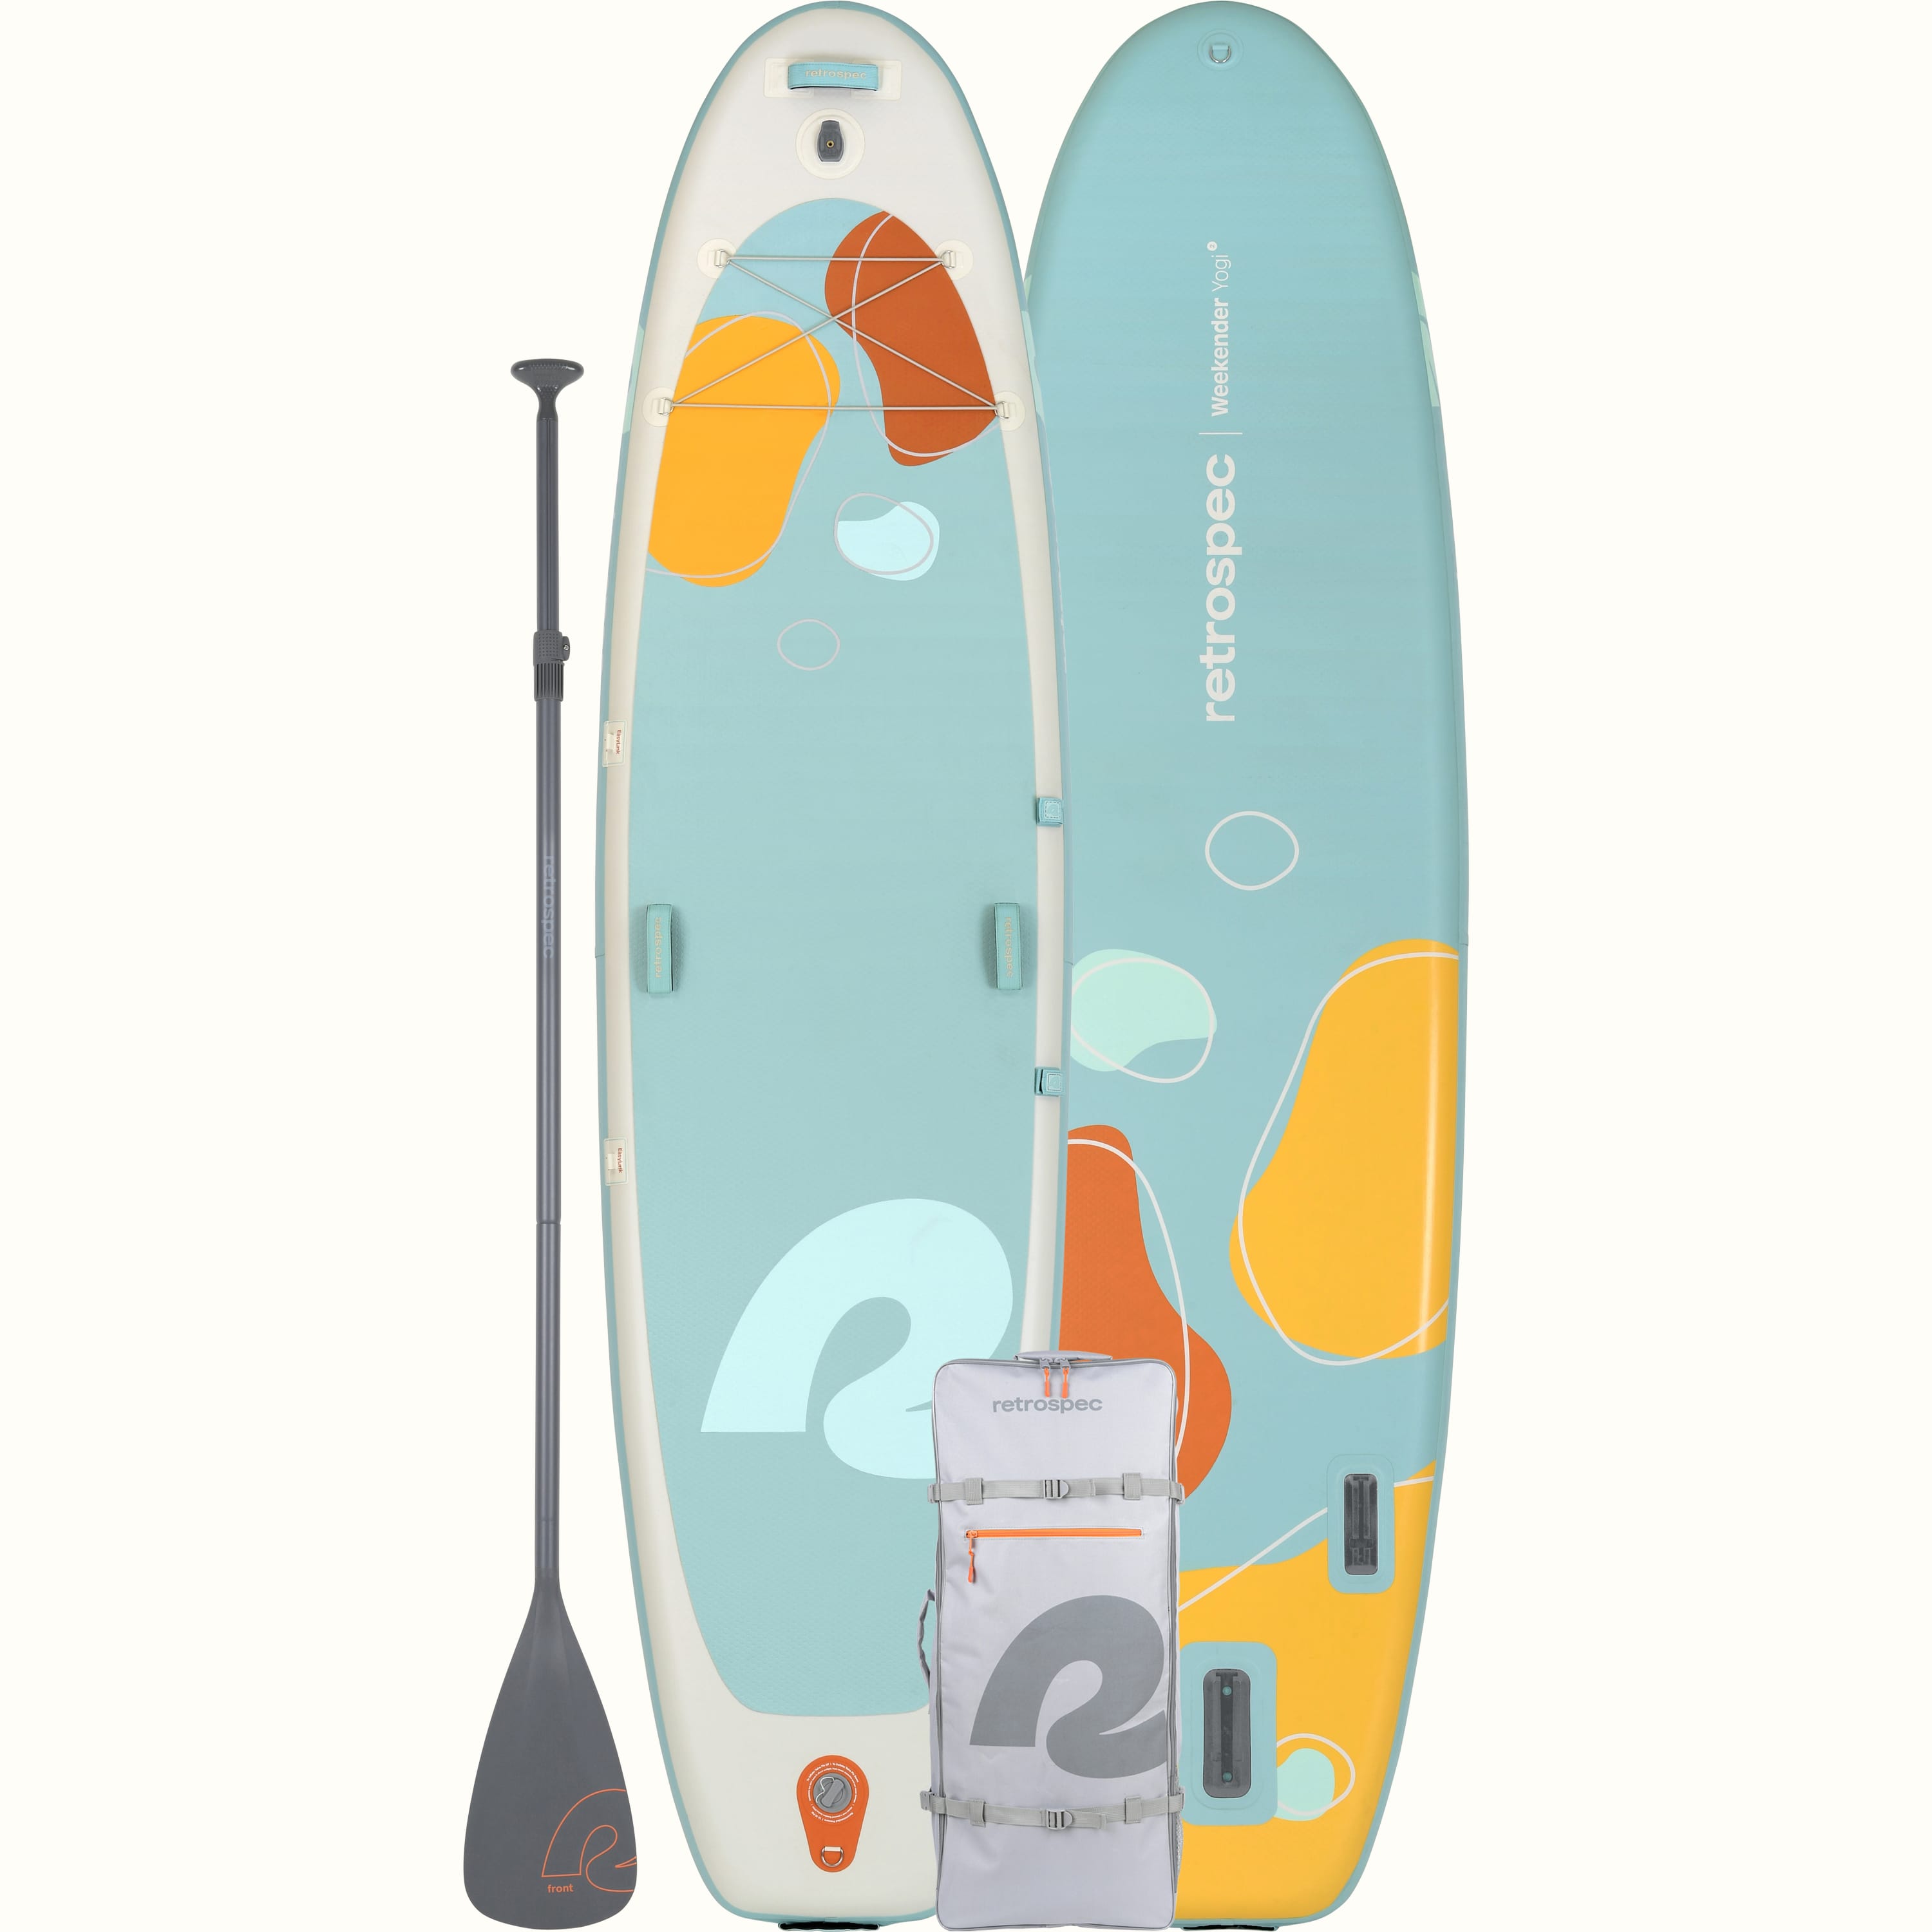  SUP Stand Up Paddle Board Surfing gift ideas Yoga SUP